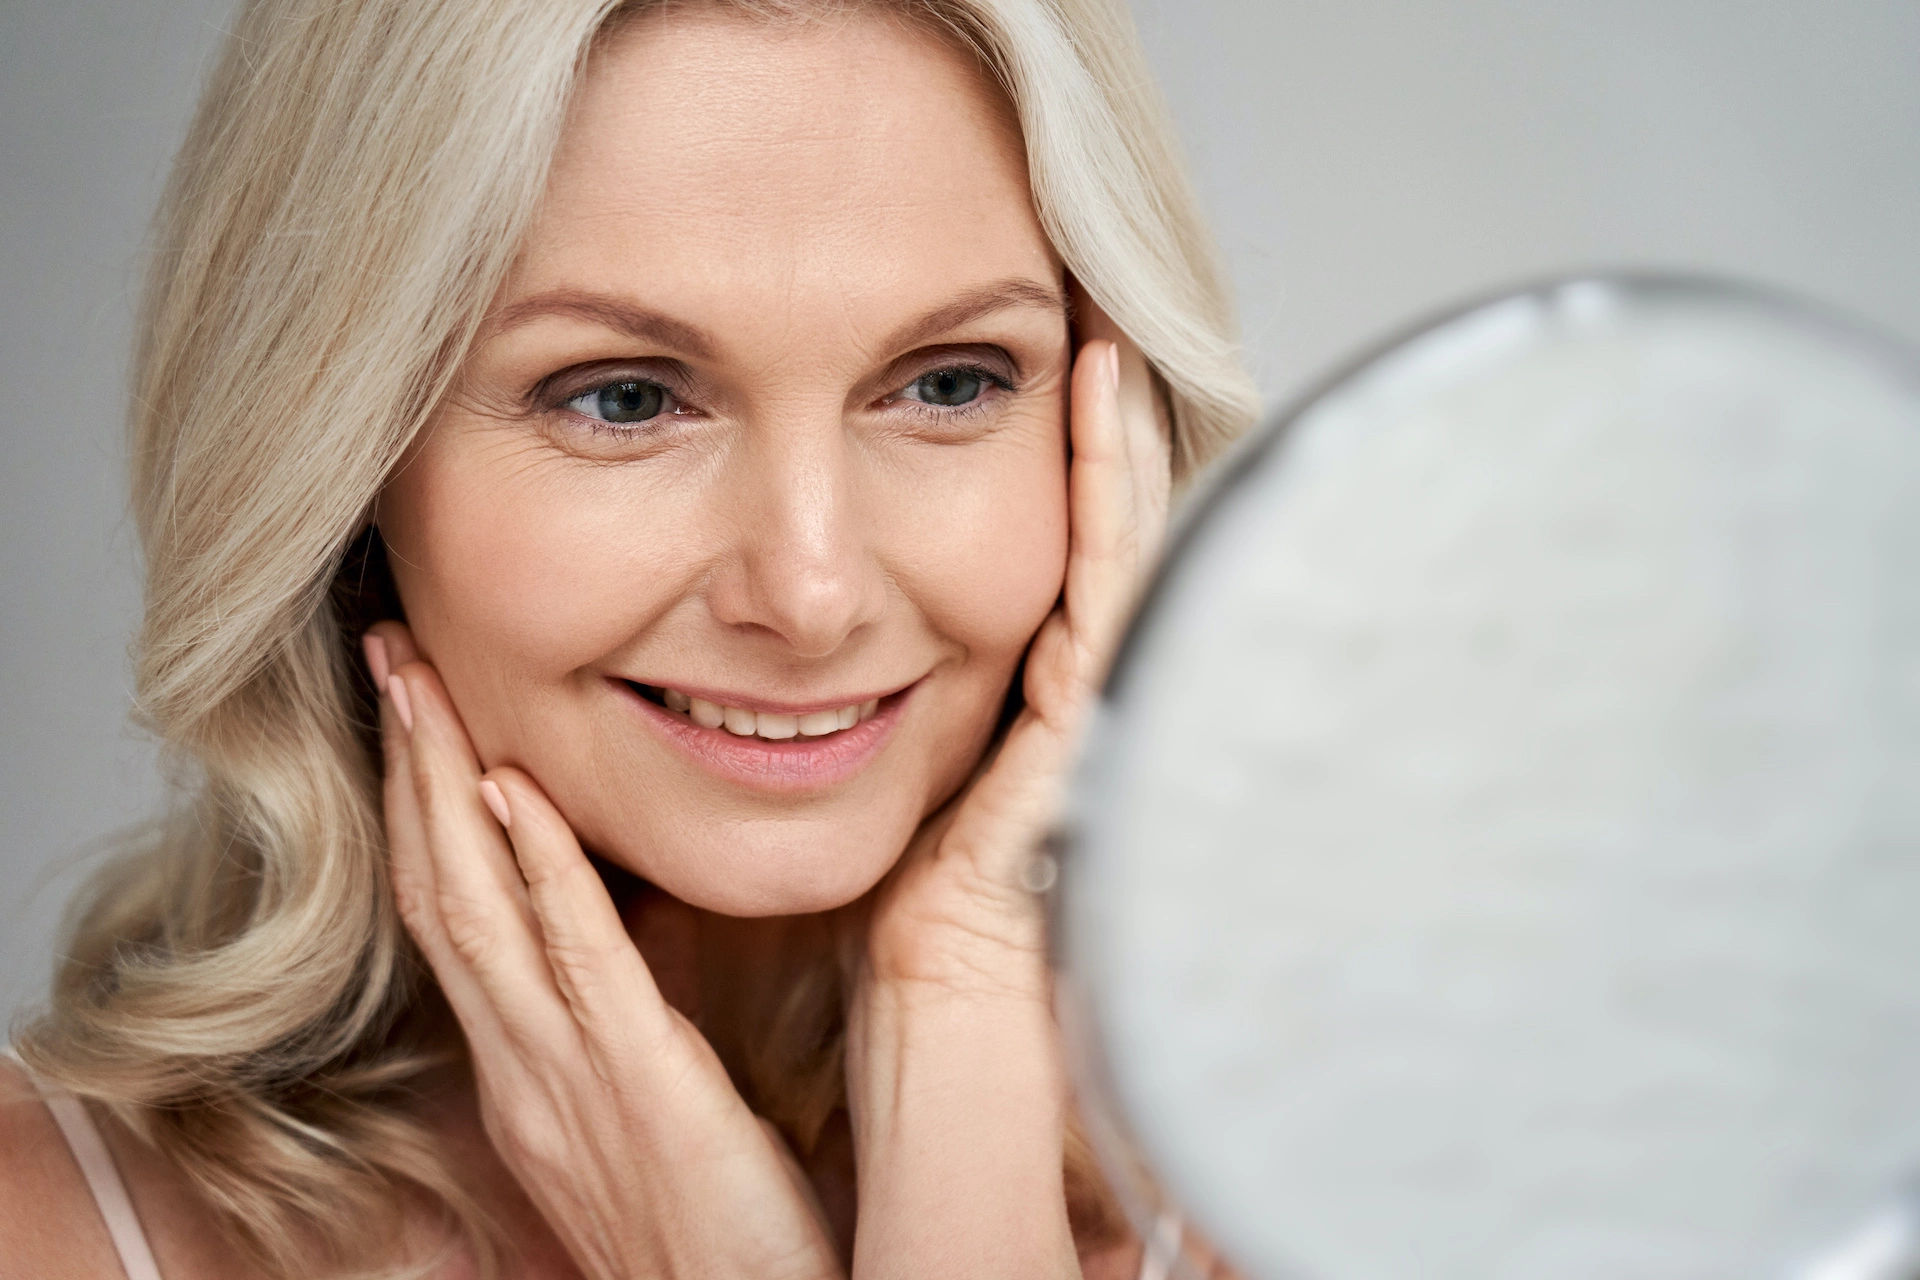 Anti-aging skin care tips: A dermatologist's secrets to younger-looking skin